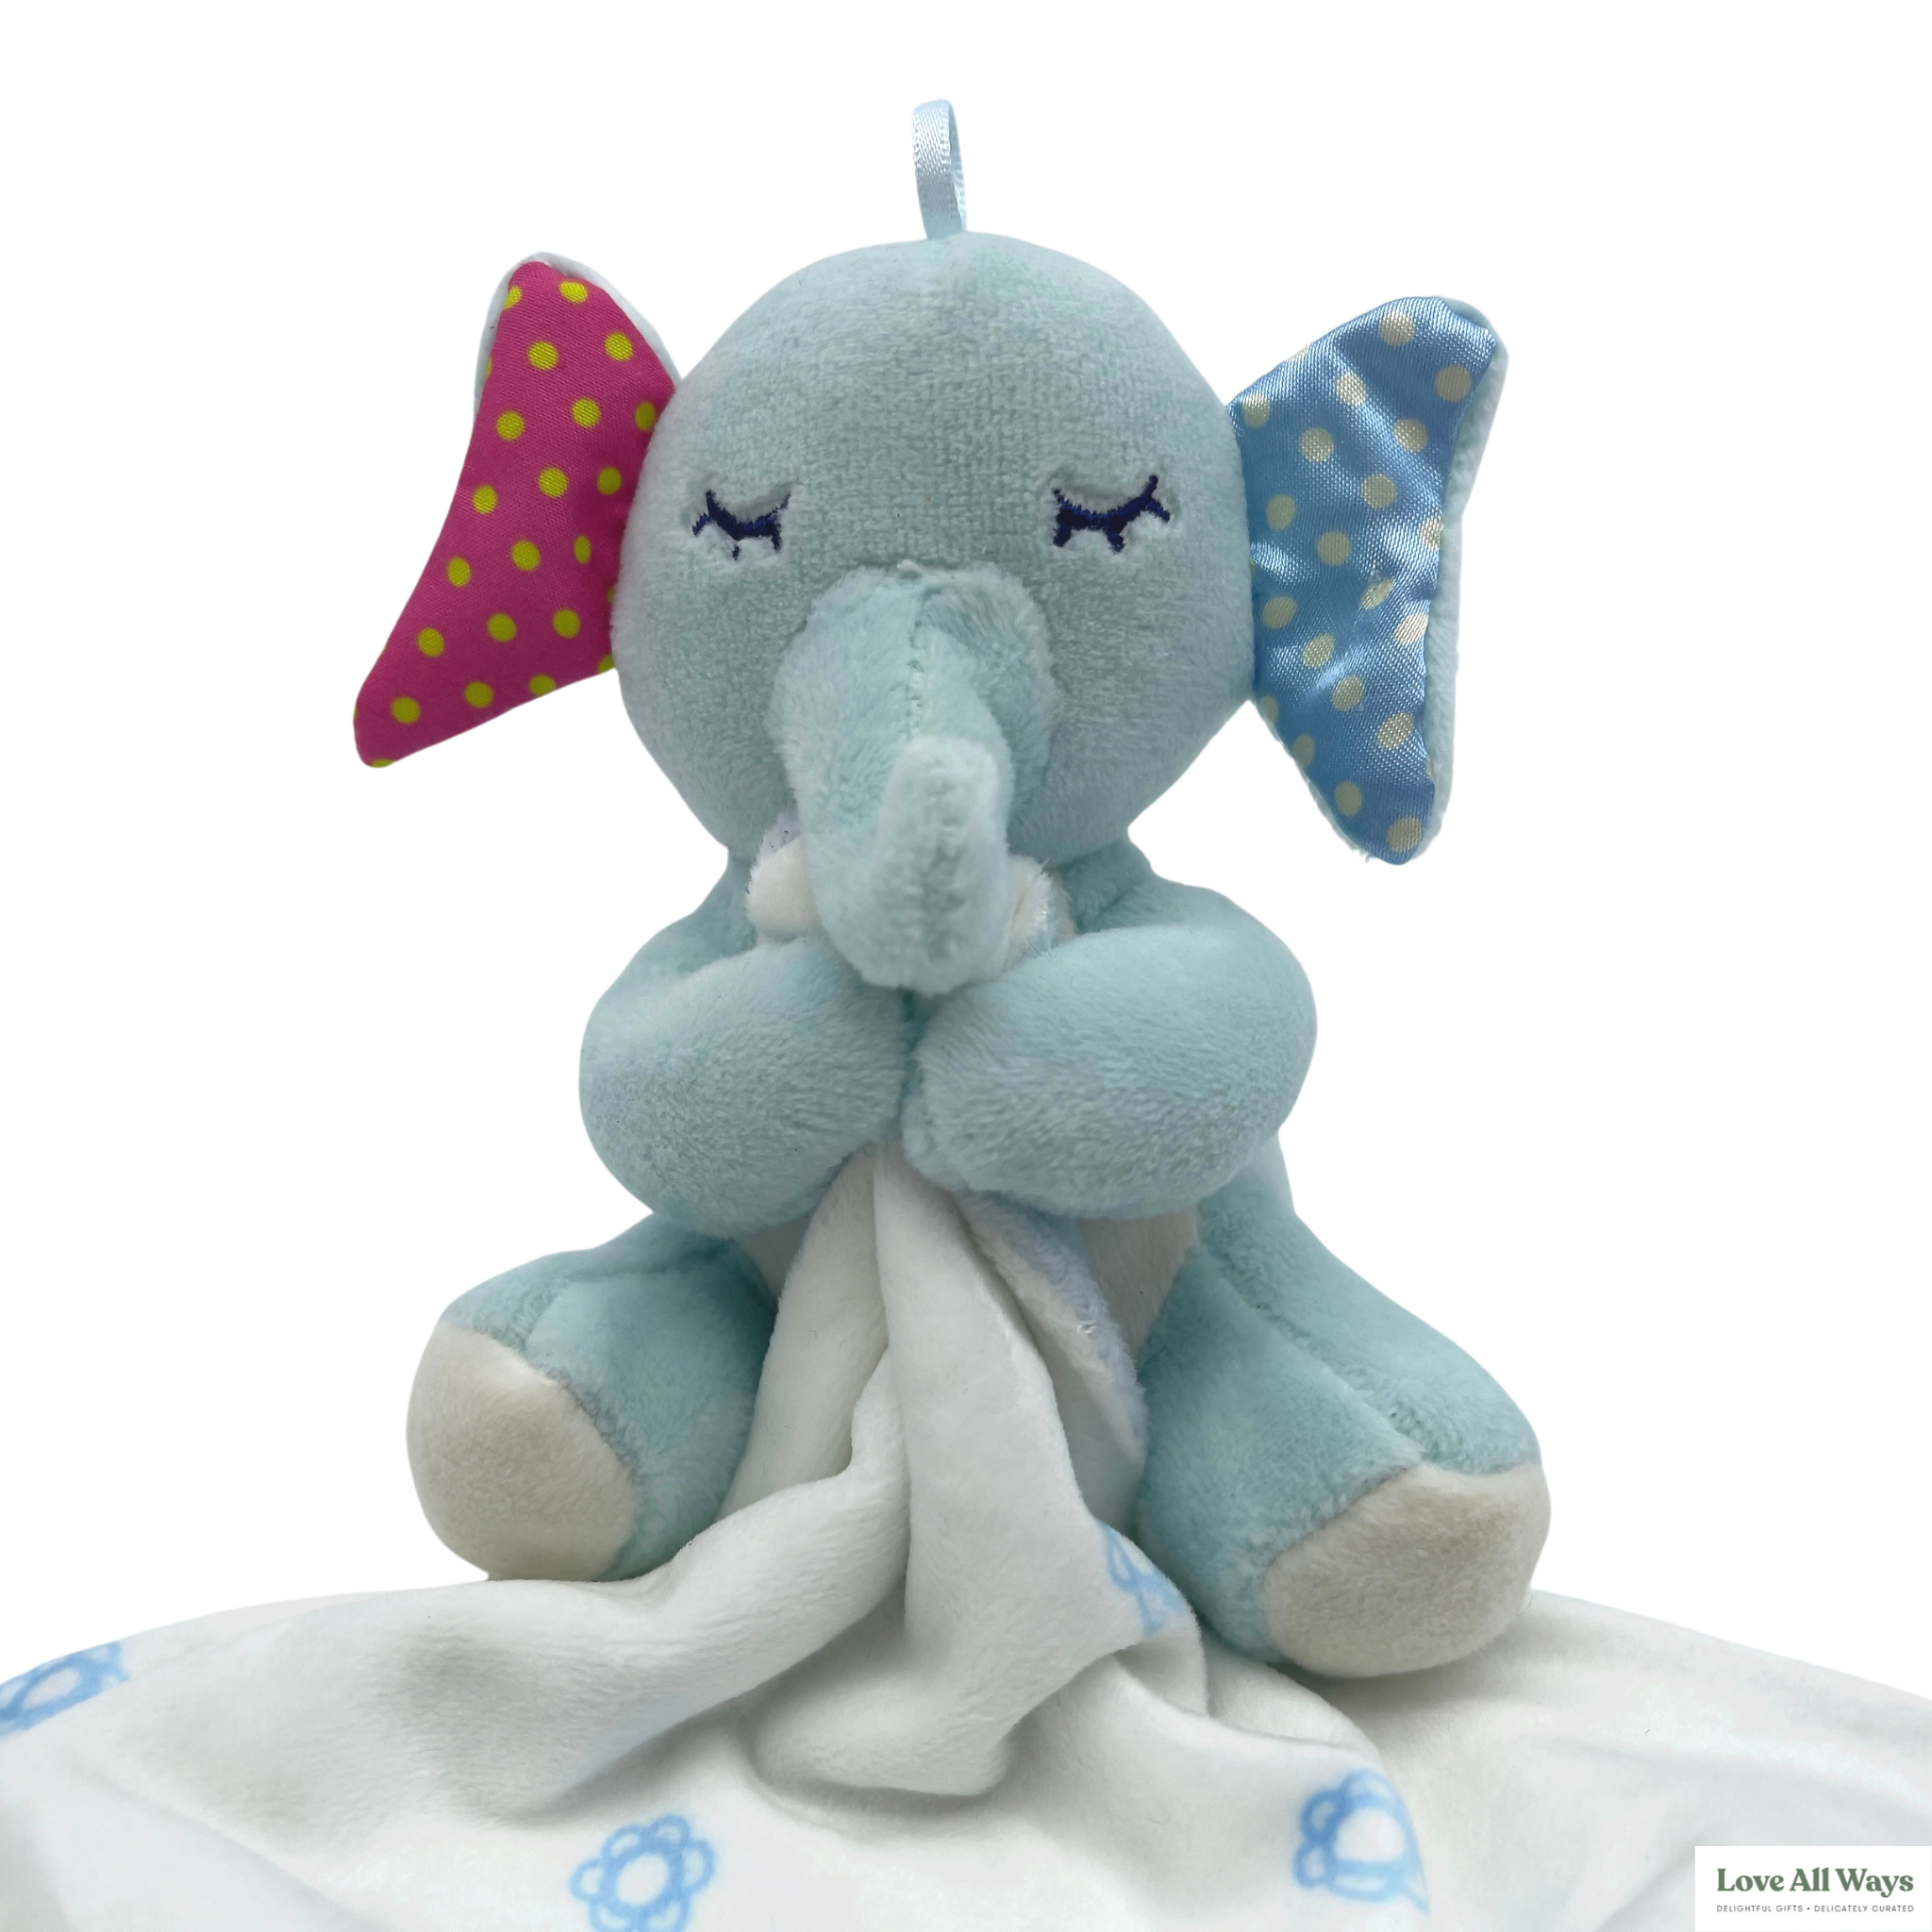 Love All Ways plush colourful Blue Elephant security blanket close up